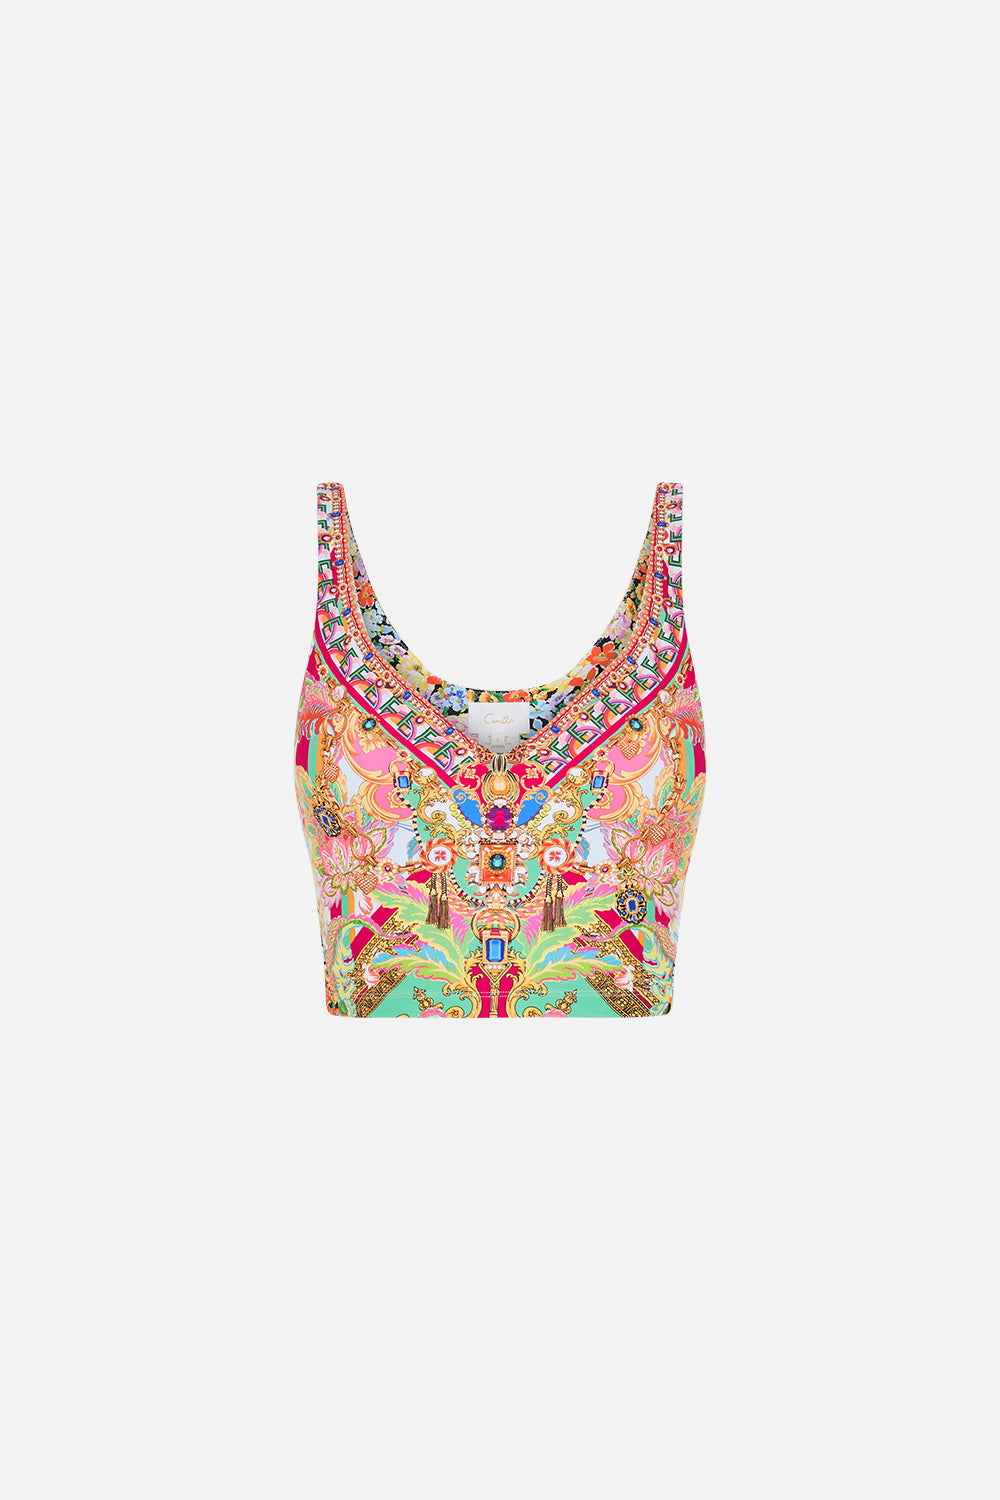 Product view of CAMILLA printed activewear crop tank in Ciao Bella print